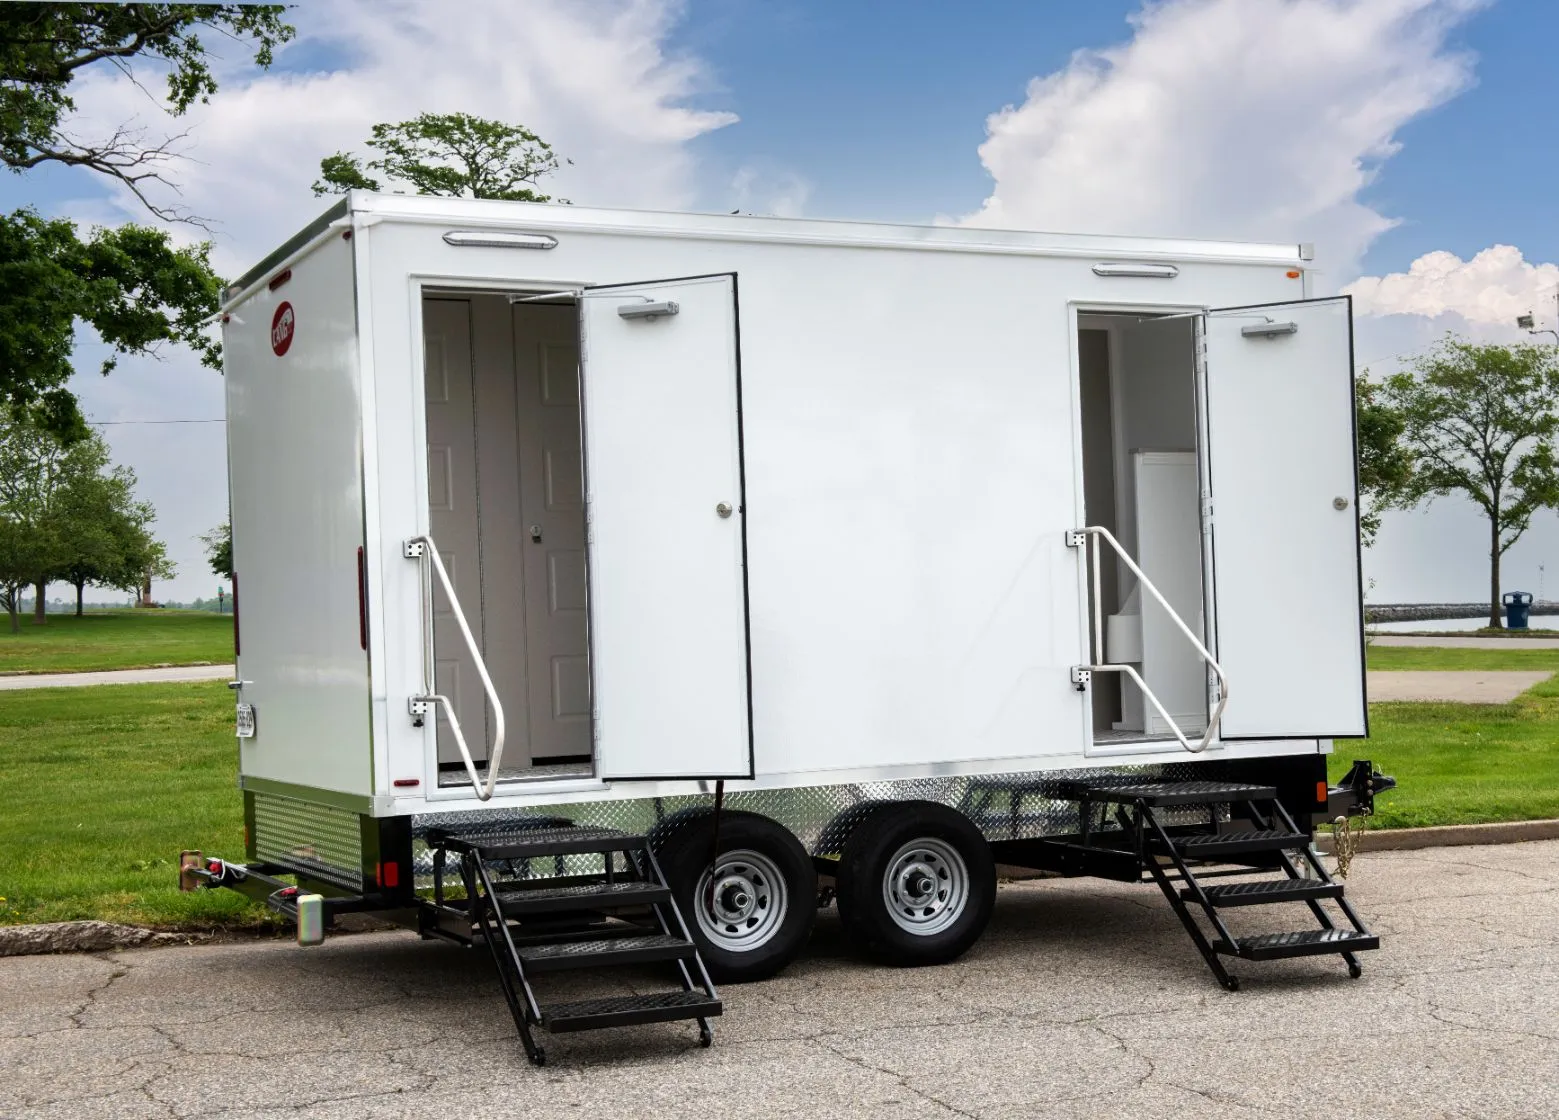 White luxury portable restroom trailer parked on a curb - Why Your Porta Potty Rental Business Needs ADA-Approved Units - ServiceCore Blog